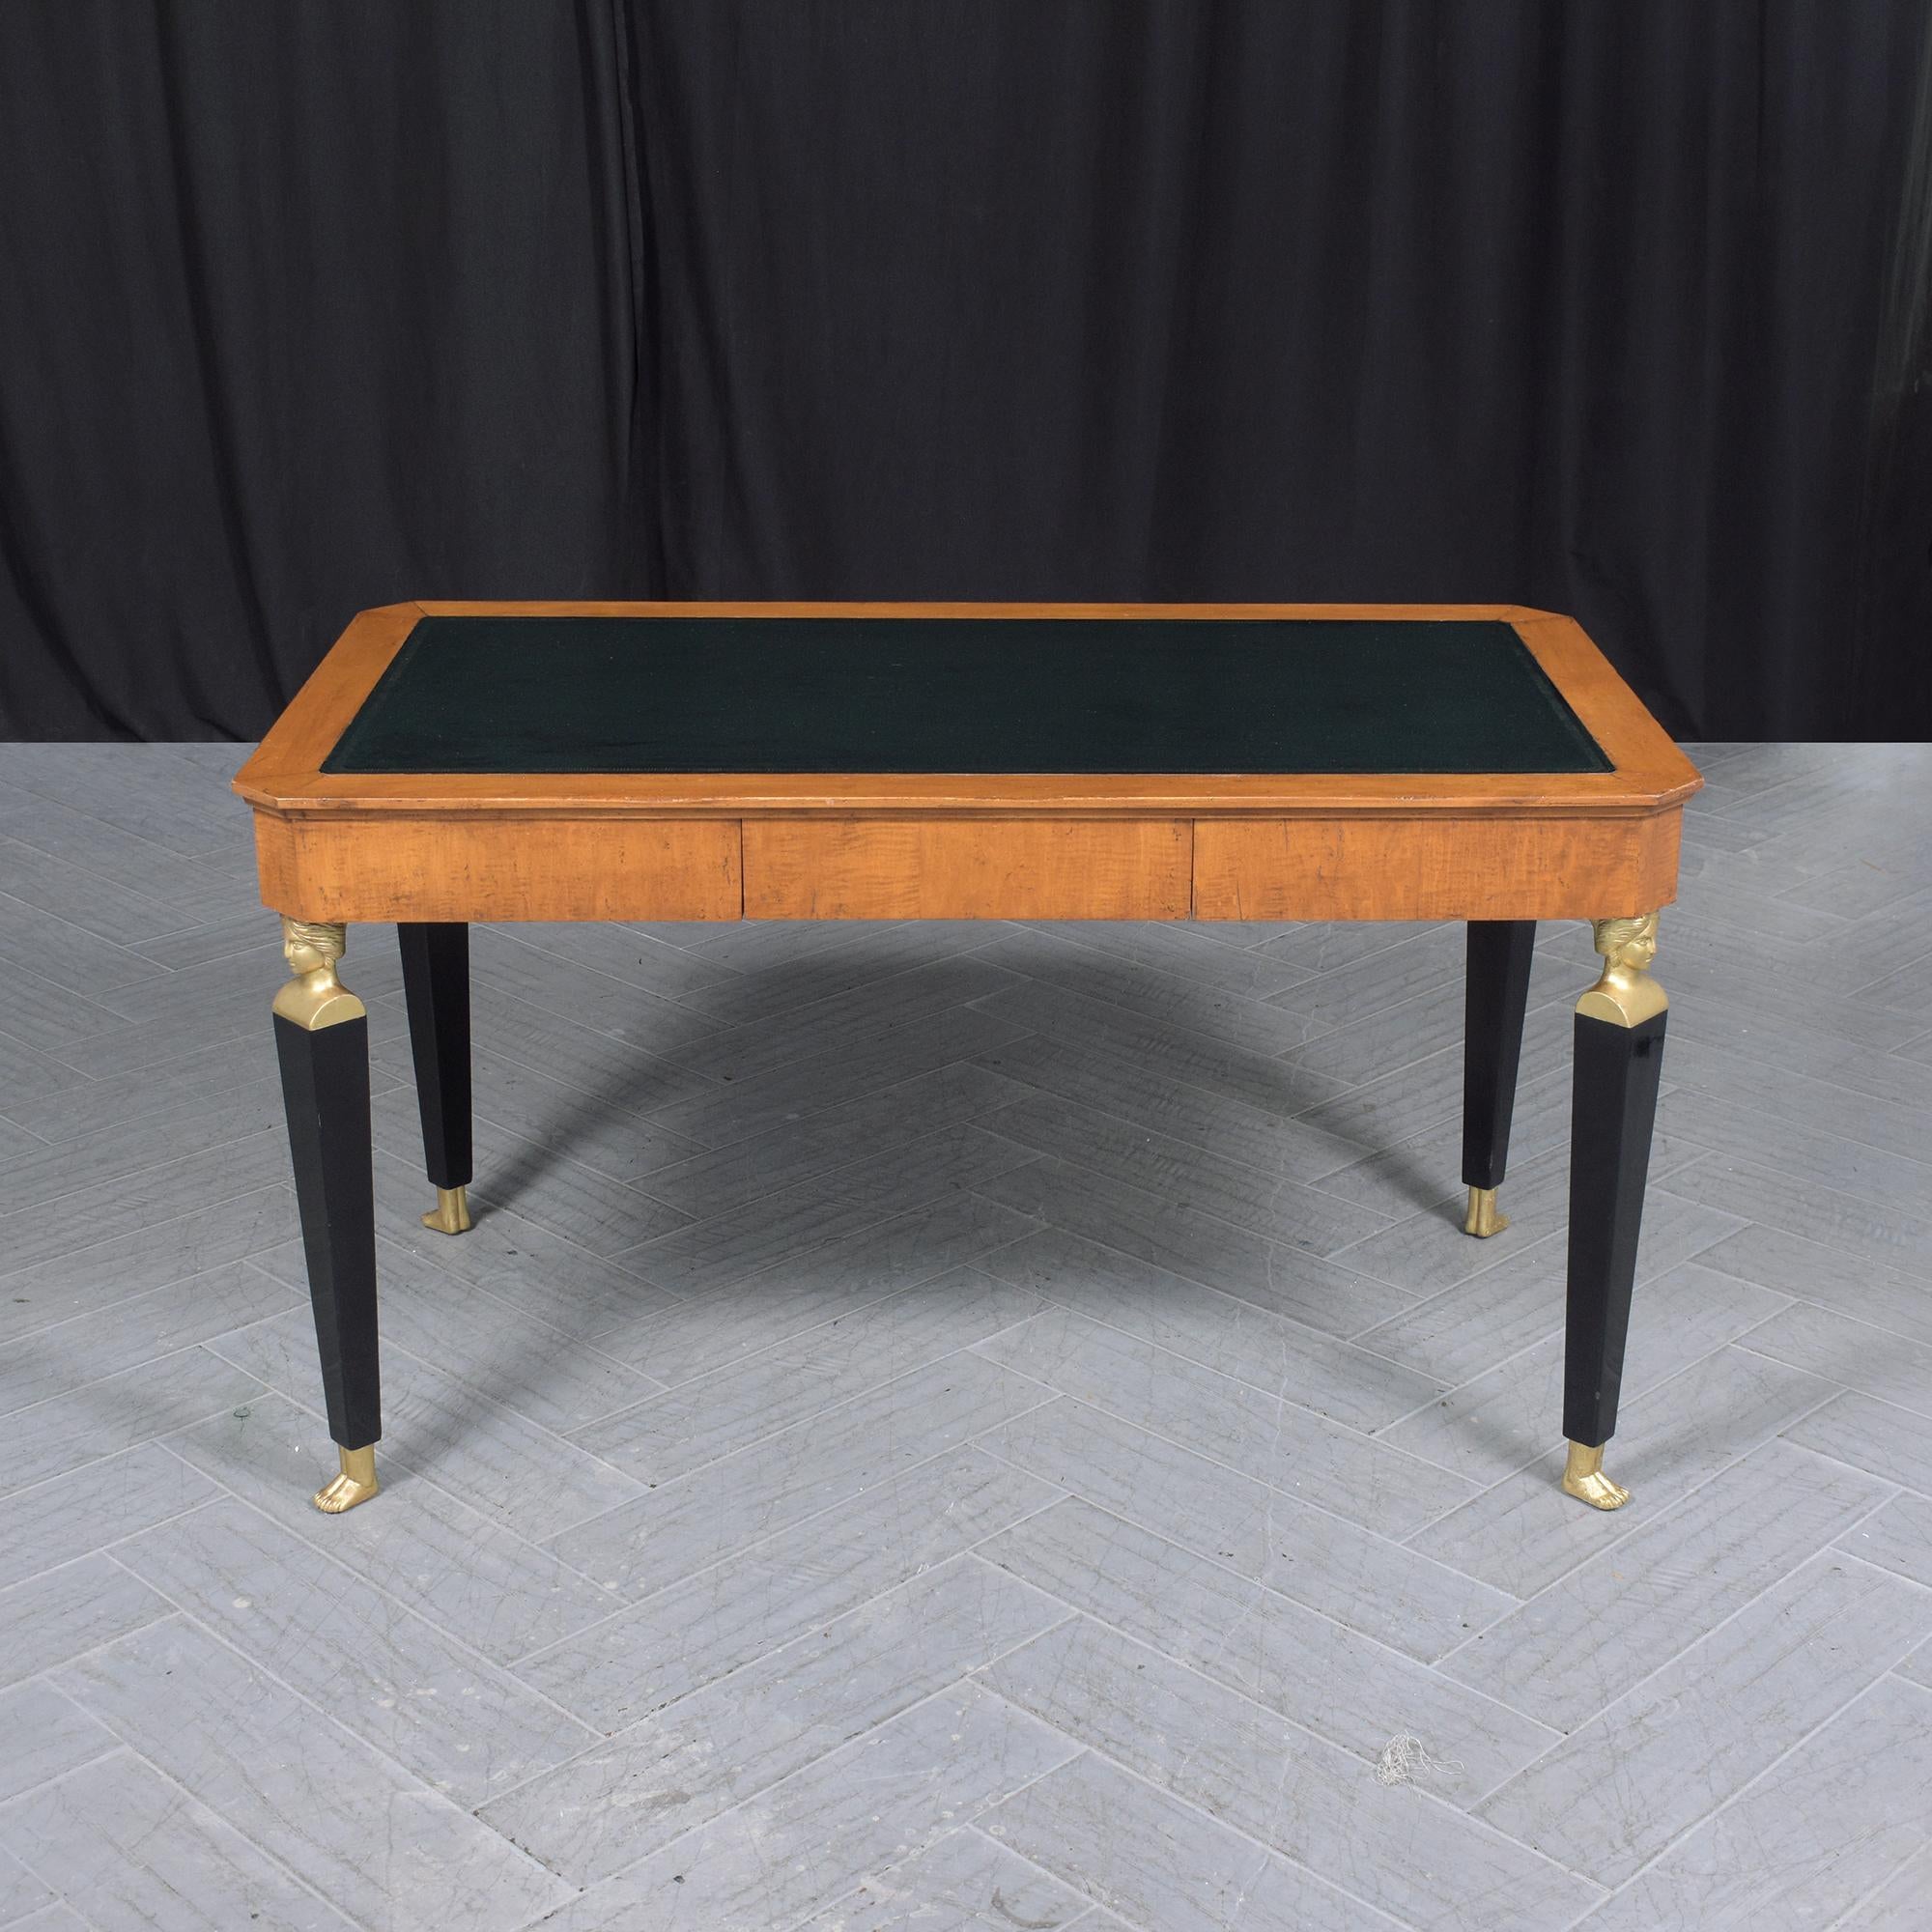 Discover the elegance of this vintage Empire desk, meticulously hand-crafted from wood and professionally restored by our in-house team. In great condition, the desk boasts a rectangular top, adorned with a newly dyed dark green leather insert that